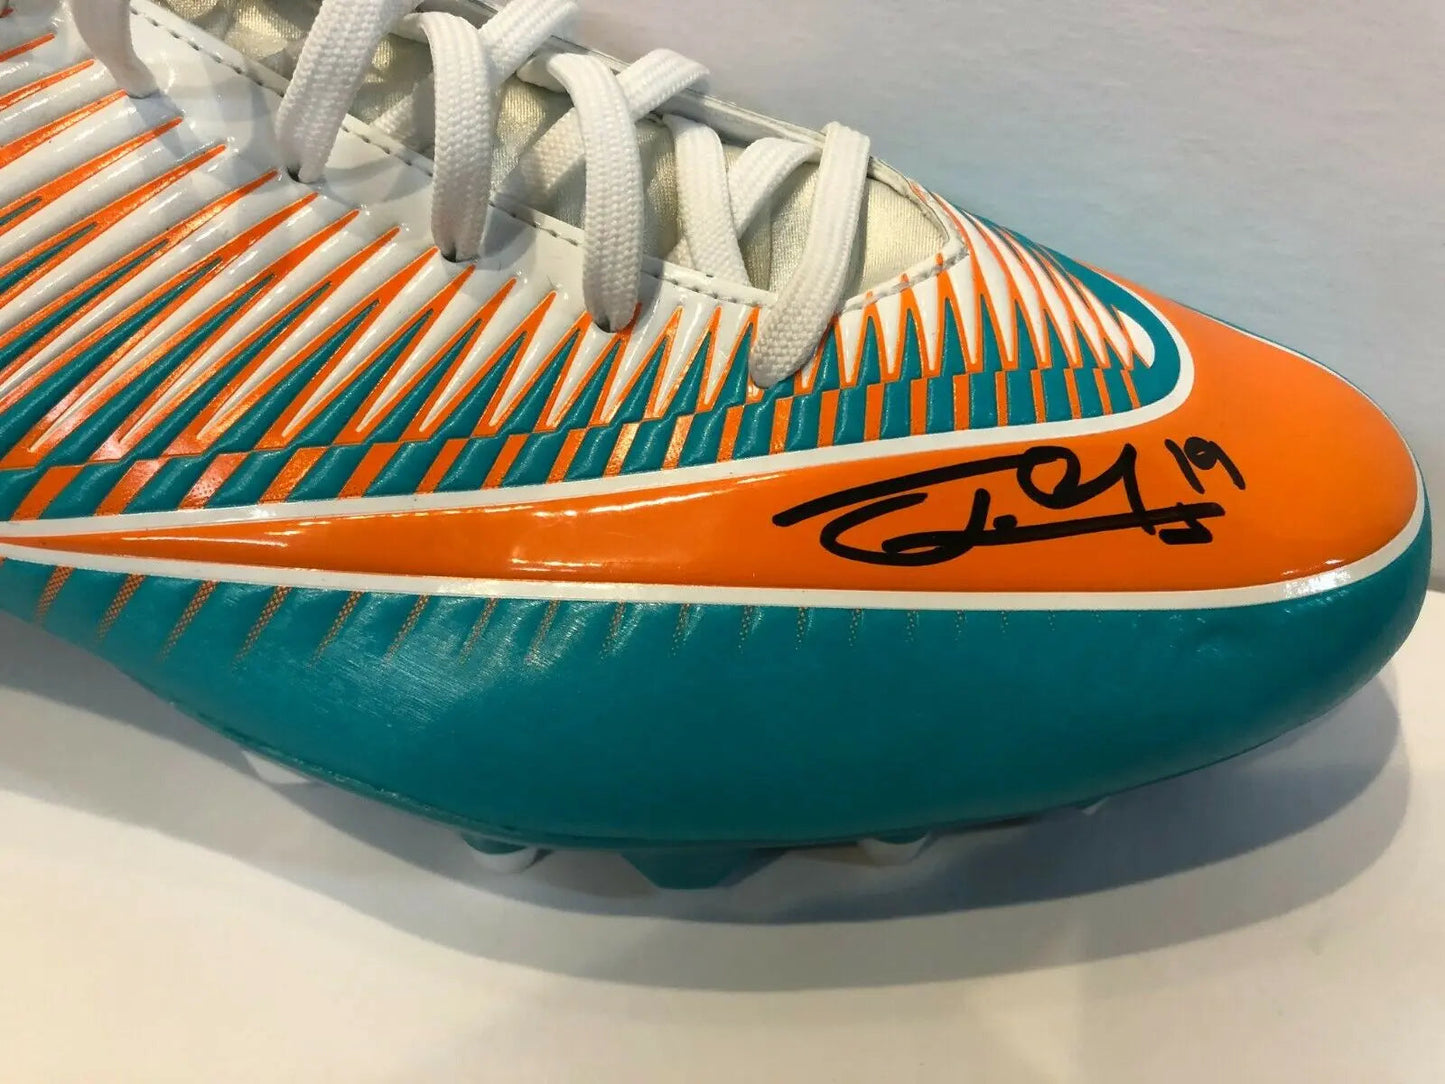 MVP Authentics Miami Dolphins Jakeem Grant Autographed Signed Nike Cleat Jsa Coa 116.10 sports jersey framing , jersey framing